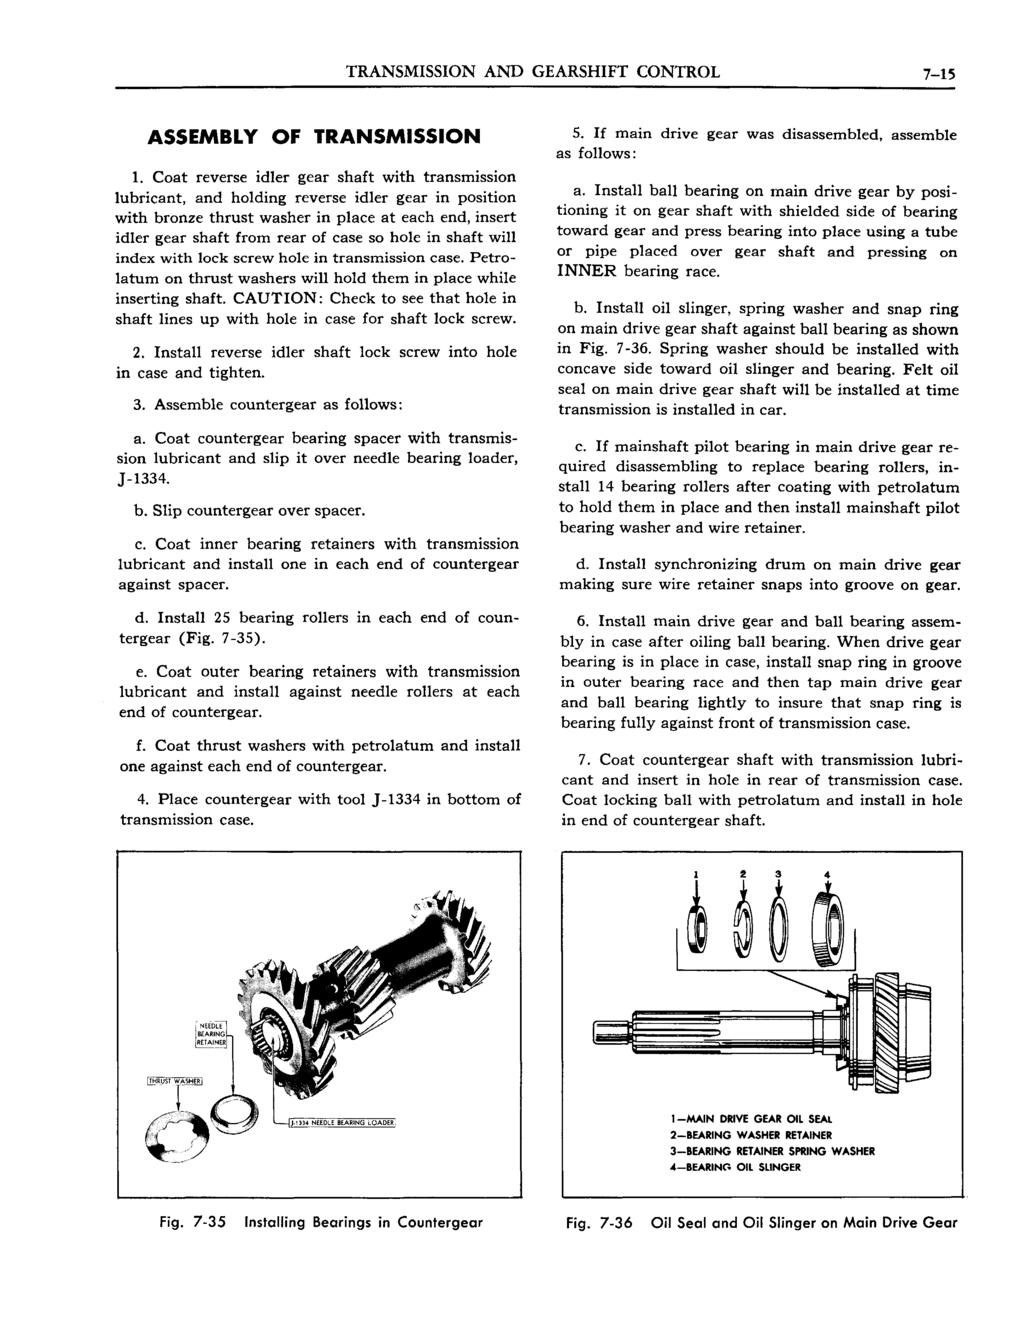 TRANSMISSION AND GEARSHIFT CONTROL 7-15 ASSEMBLY OF TRANSMISSION 1.